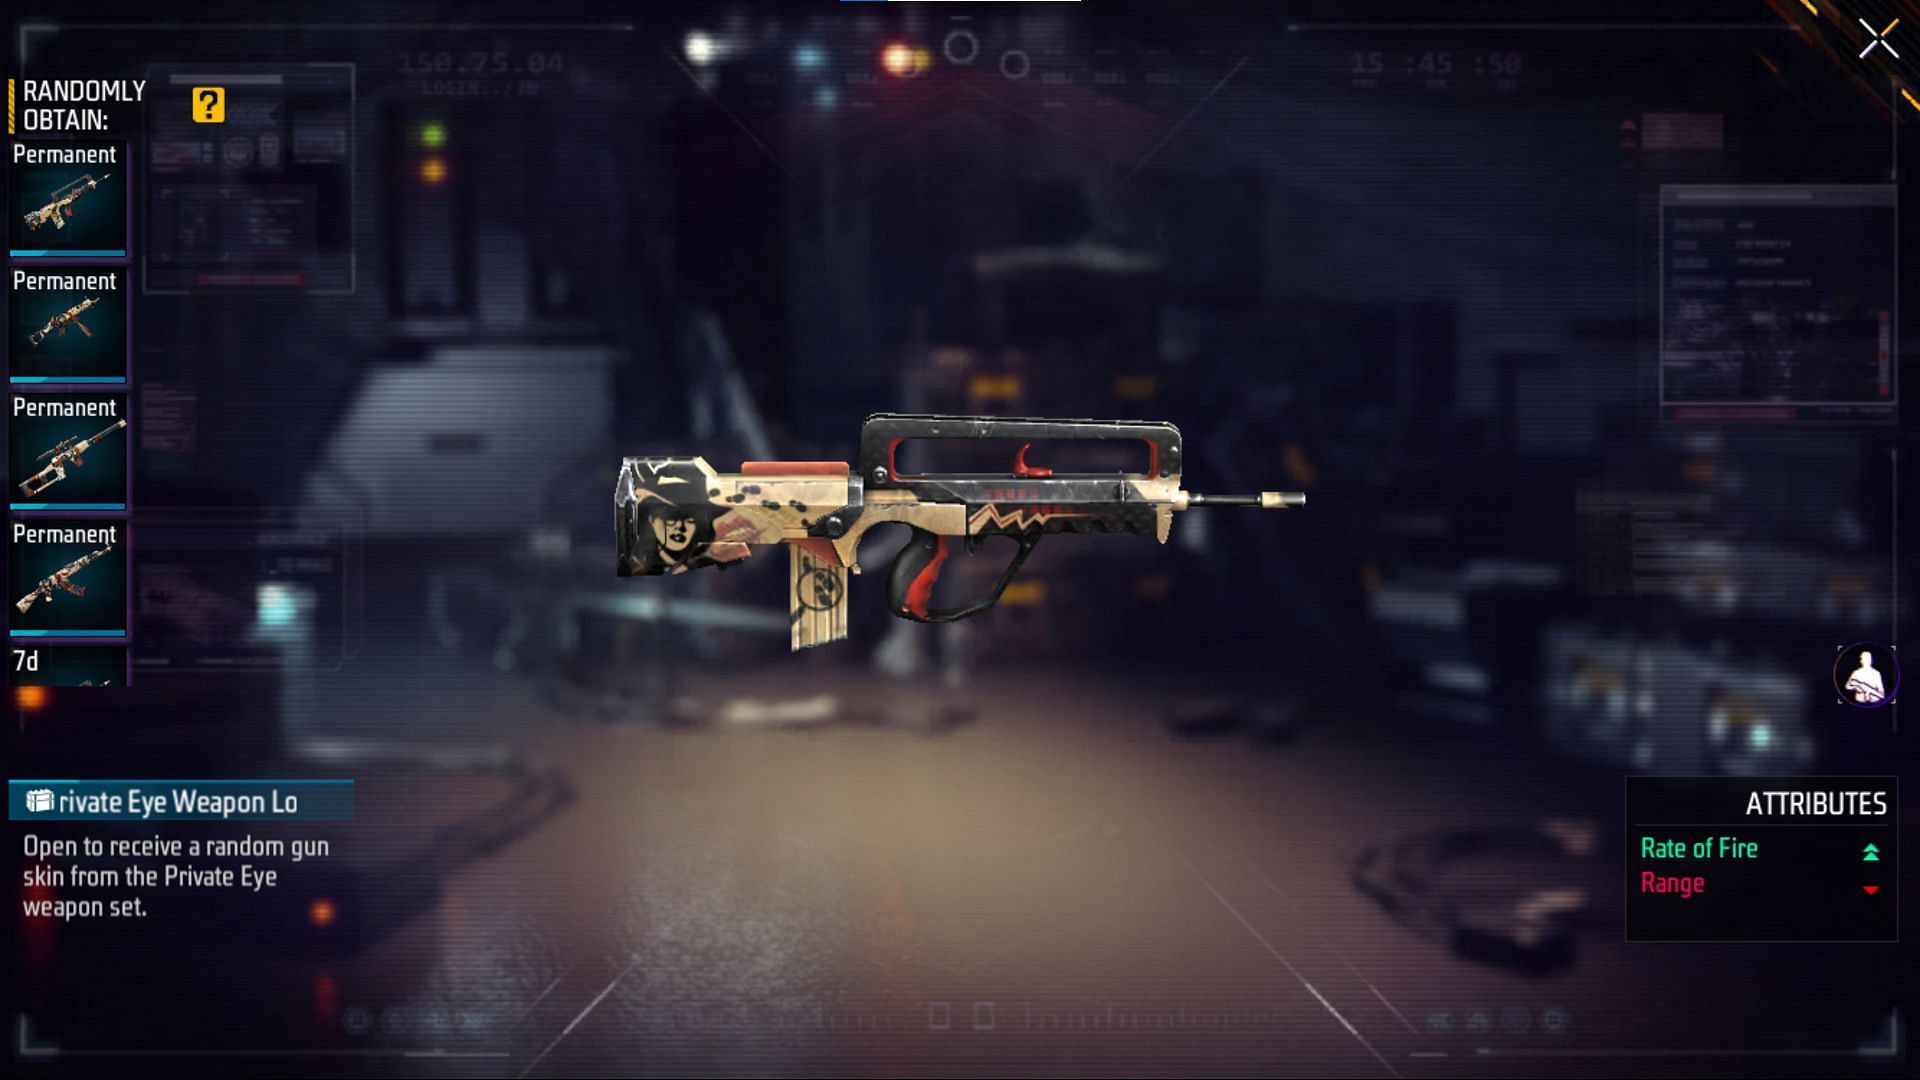 Open the Private Eye Weapon Loot Crate to receive a free gun skin (Image via Garena)